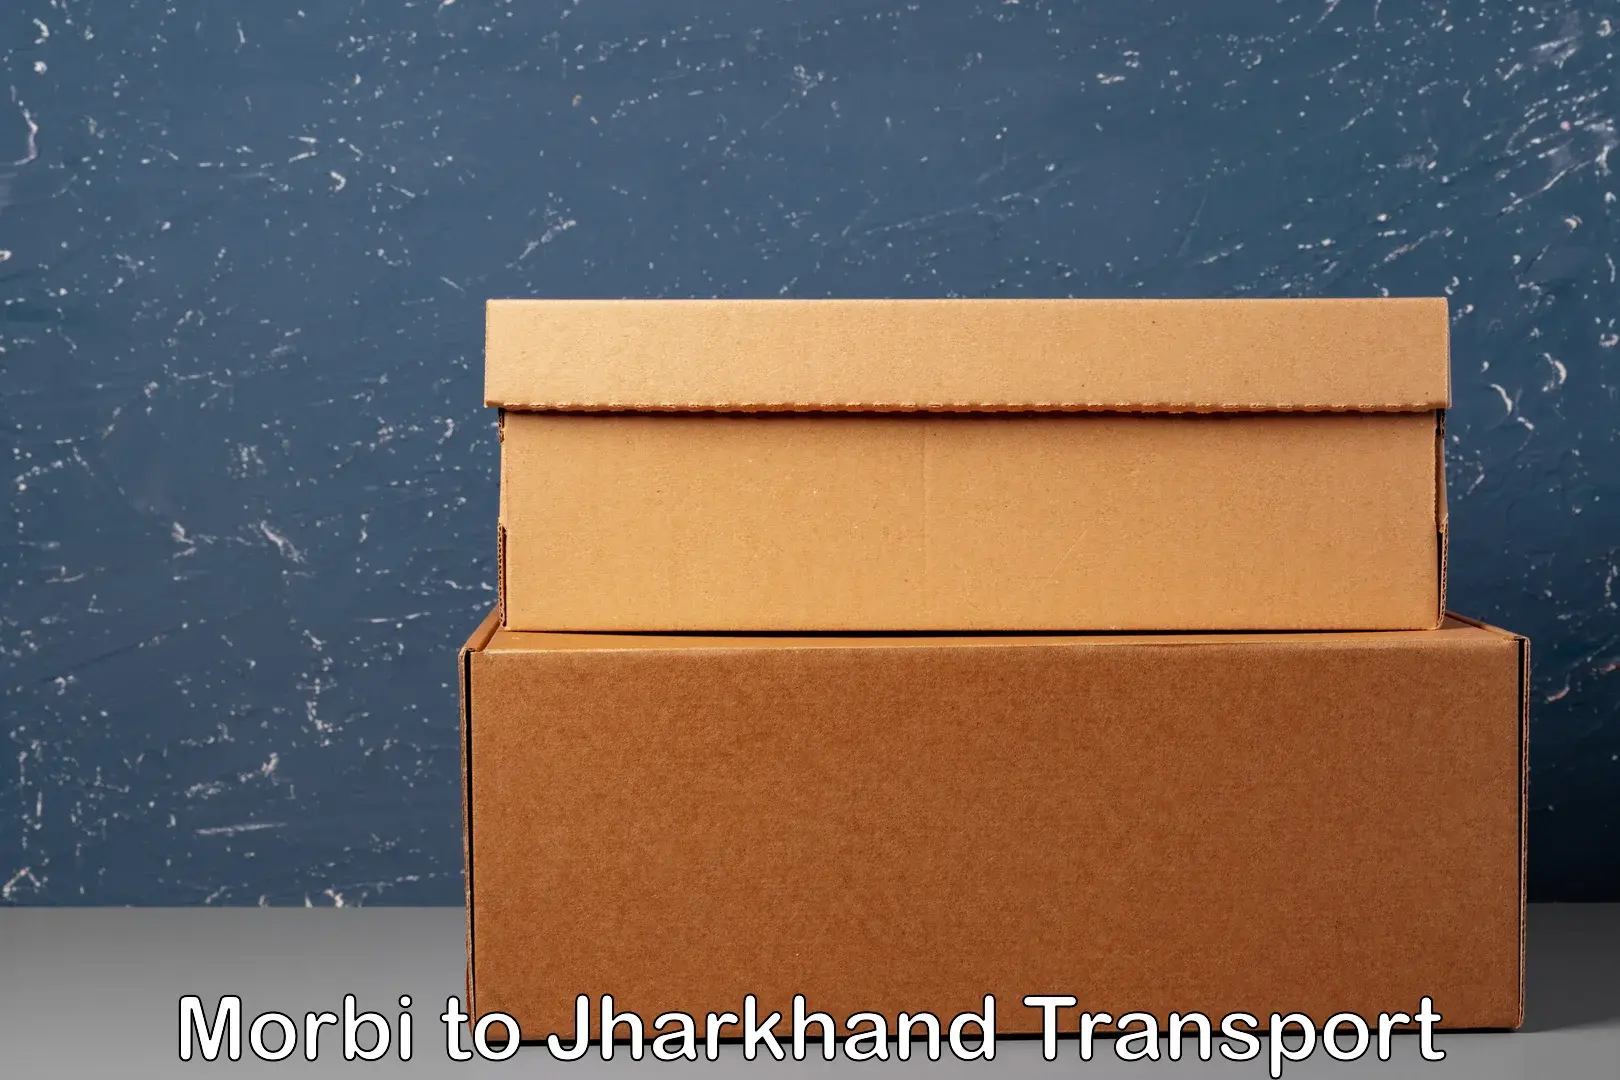 Container transport service Morbi to Jharkhand